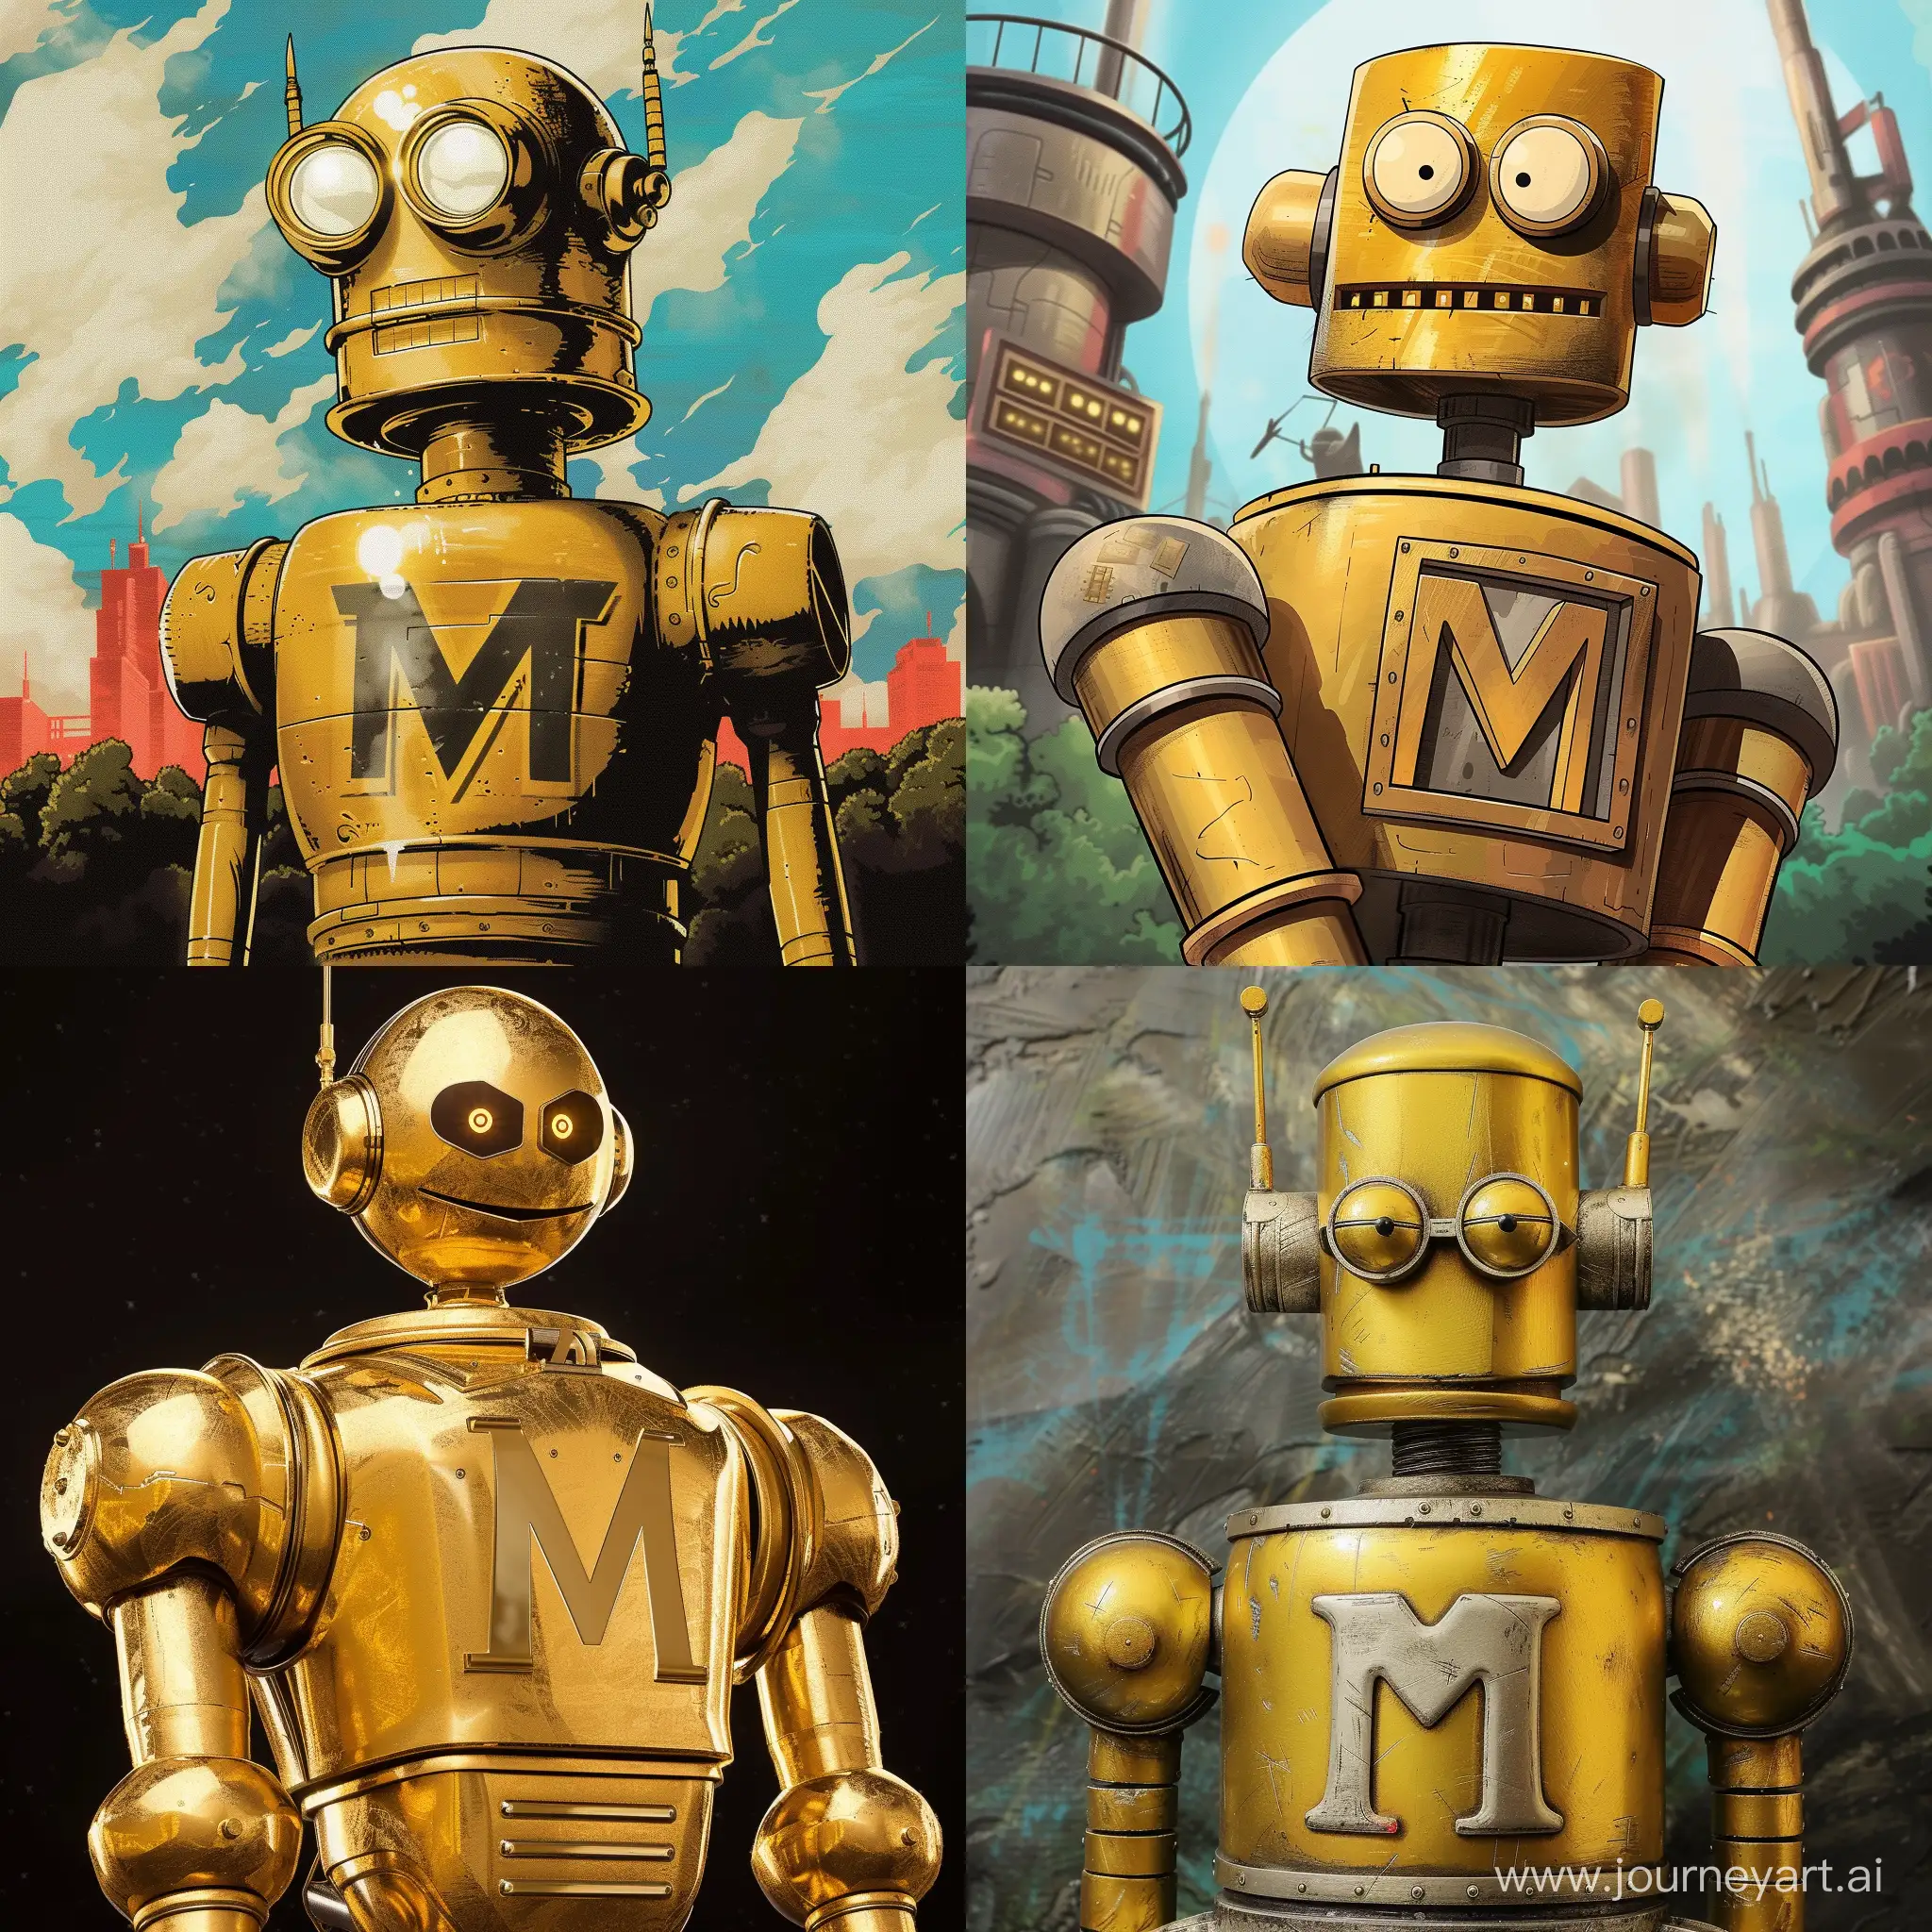 Futurama style album cover of a gold robot with a M on it